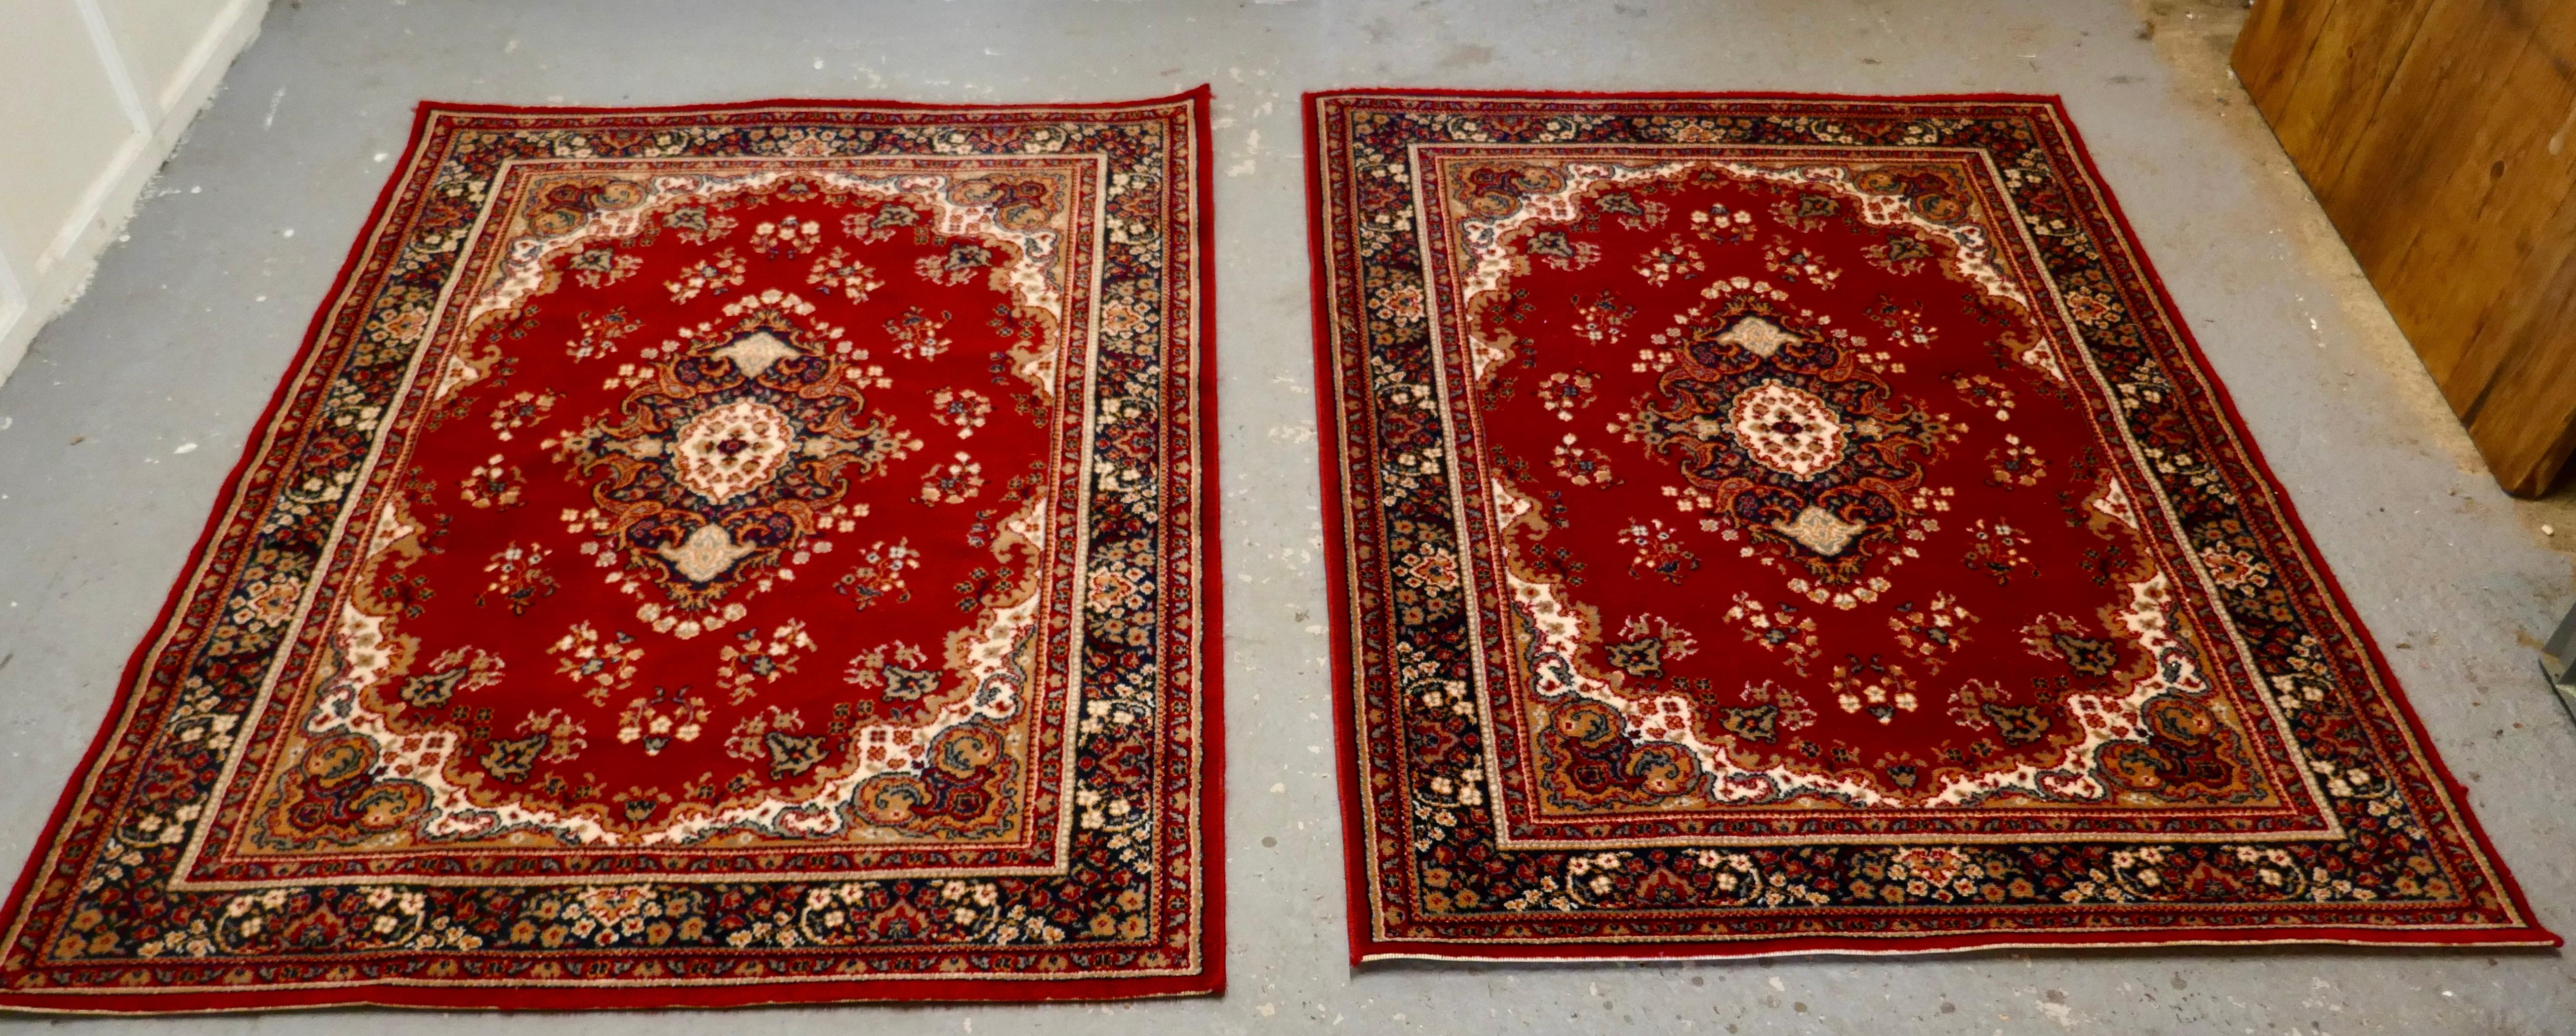 Lovely Pair of Bright Red Wool Rugs In Good Condition For Sale In Chillerton, Isle of Wight